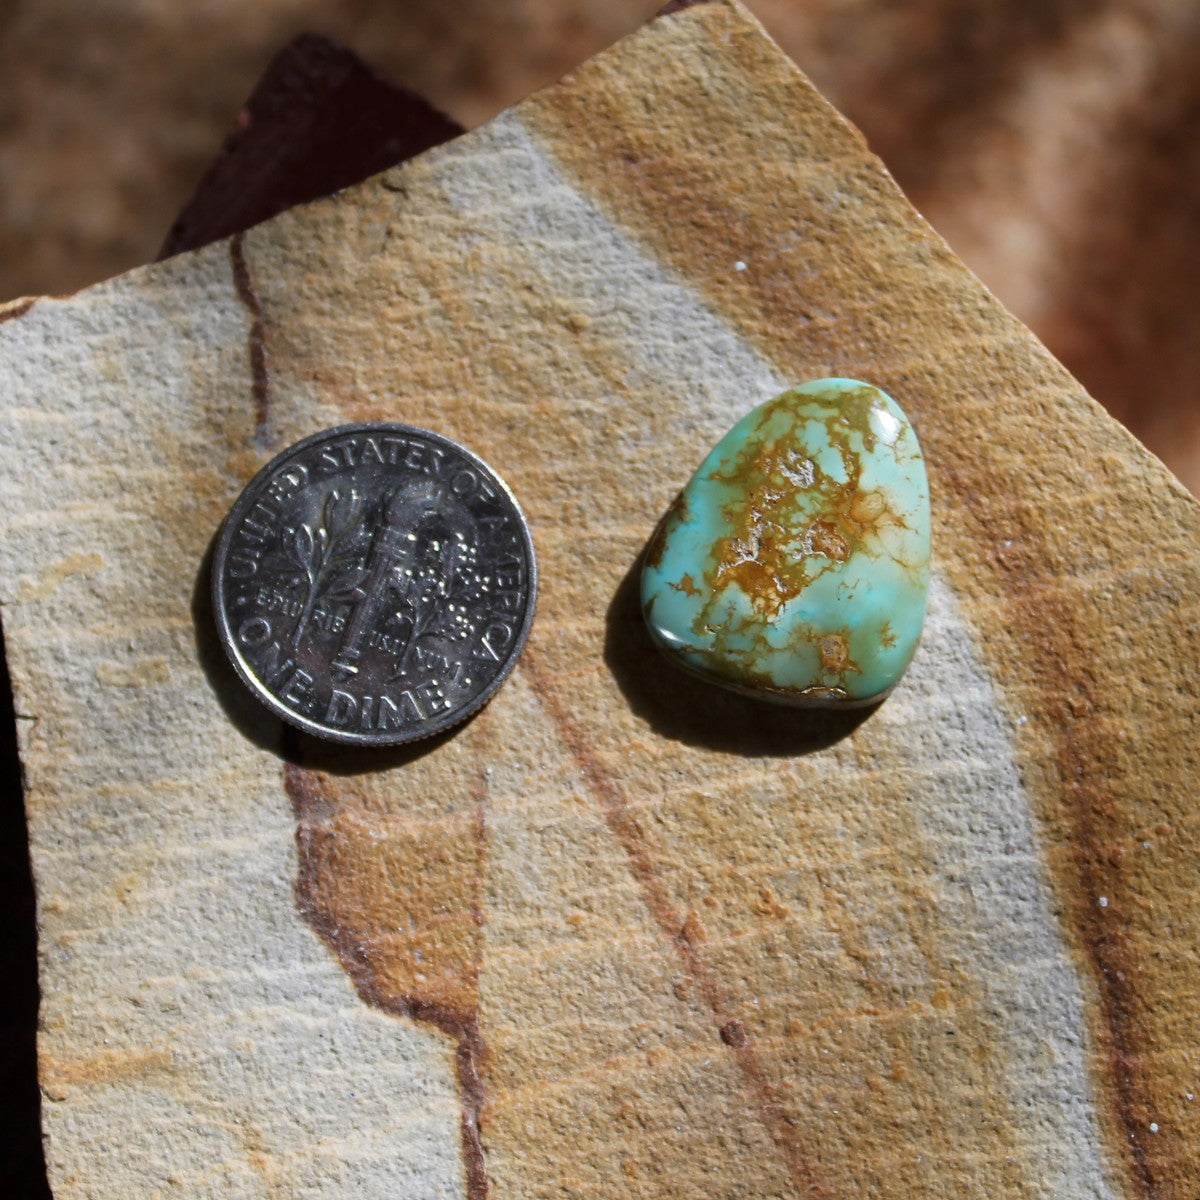 7.8 carat green Stone Mountain Turquoise cabochon